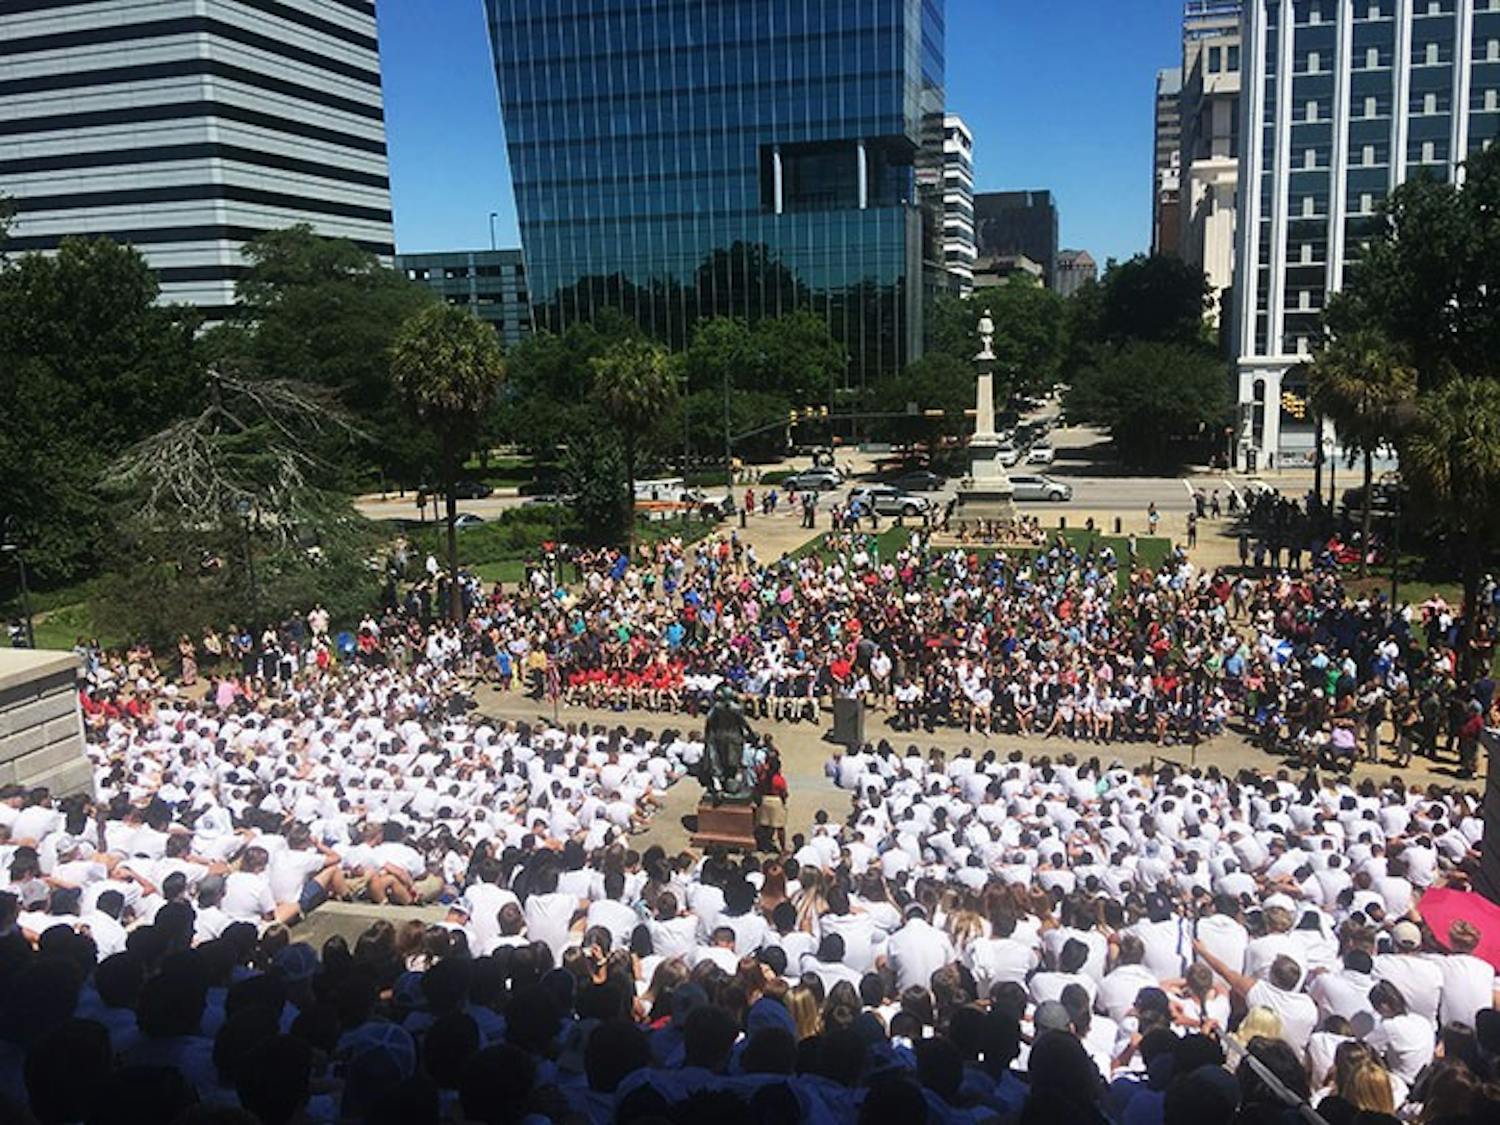 &nbsp;The boys of Palmetto Boys State sit on the steps of the South Carolina Statehouse, where they are attending an assembly after parading from Main Street to the Statehouse.&nbsp;